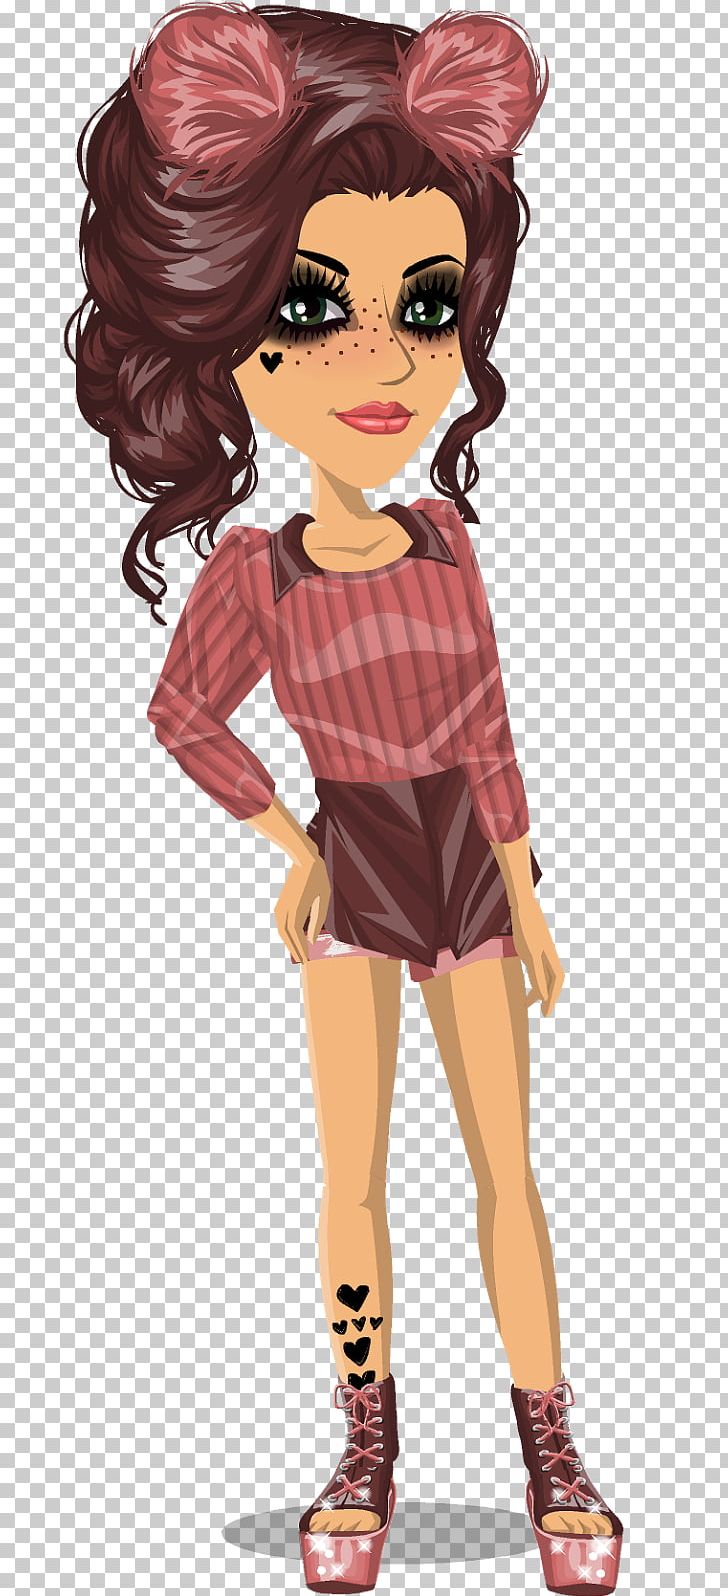 MovieStarPlanet Character Design Animation PNG, Clipart, Anime, Art, Barbie, Brown Hair, Cartoon Free PNG Download